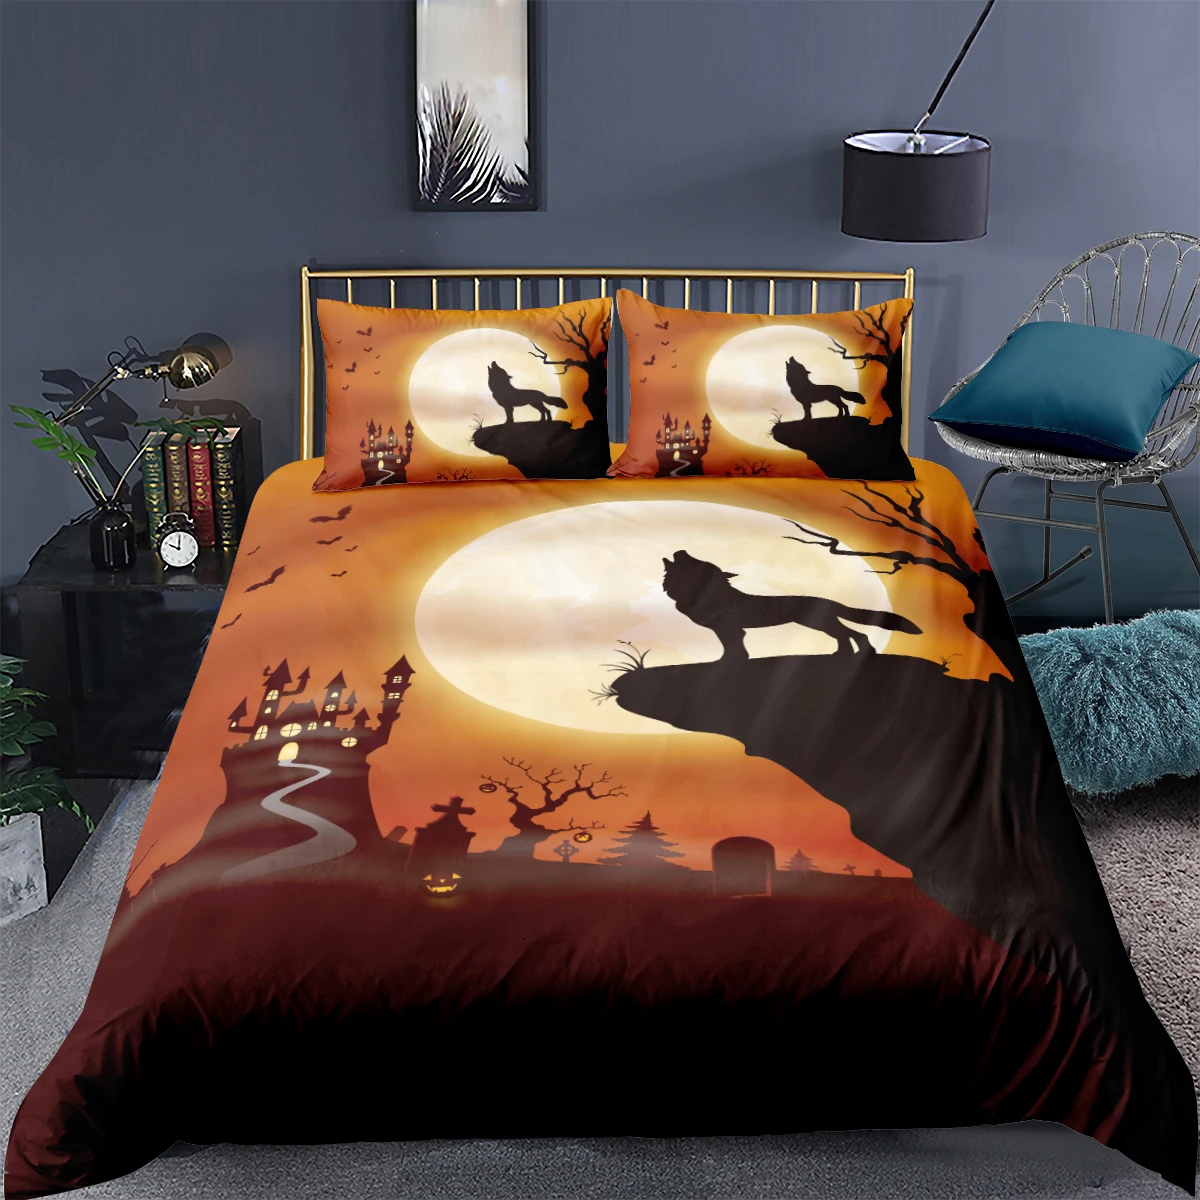 

3D Camel Duvet Cover Sets Animals Comforter Cases and Pillow Slips Full Double Single Twin Queen Size 173*230cm Wolf Beddings